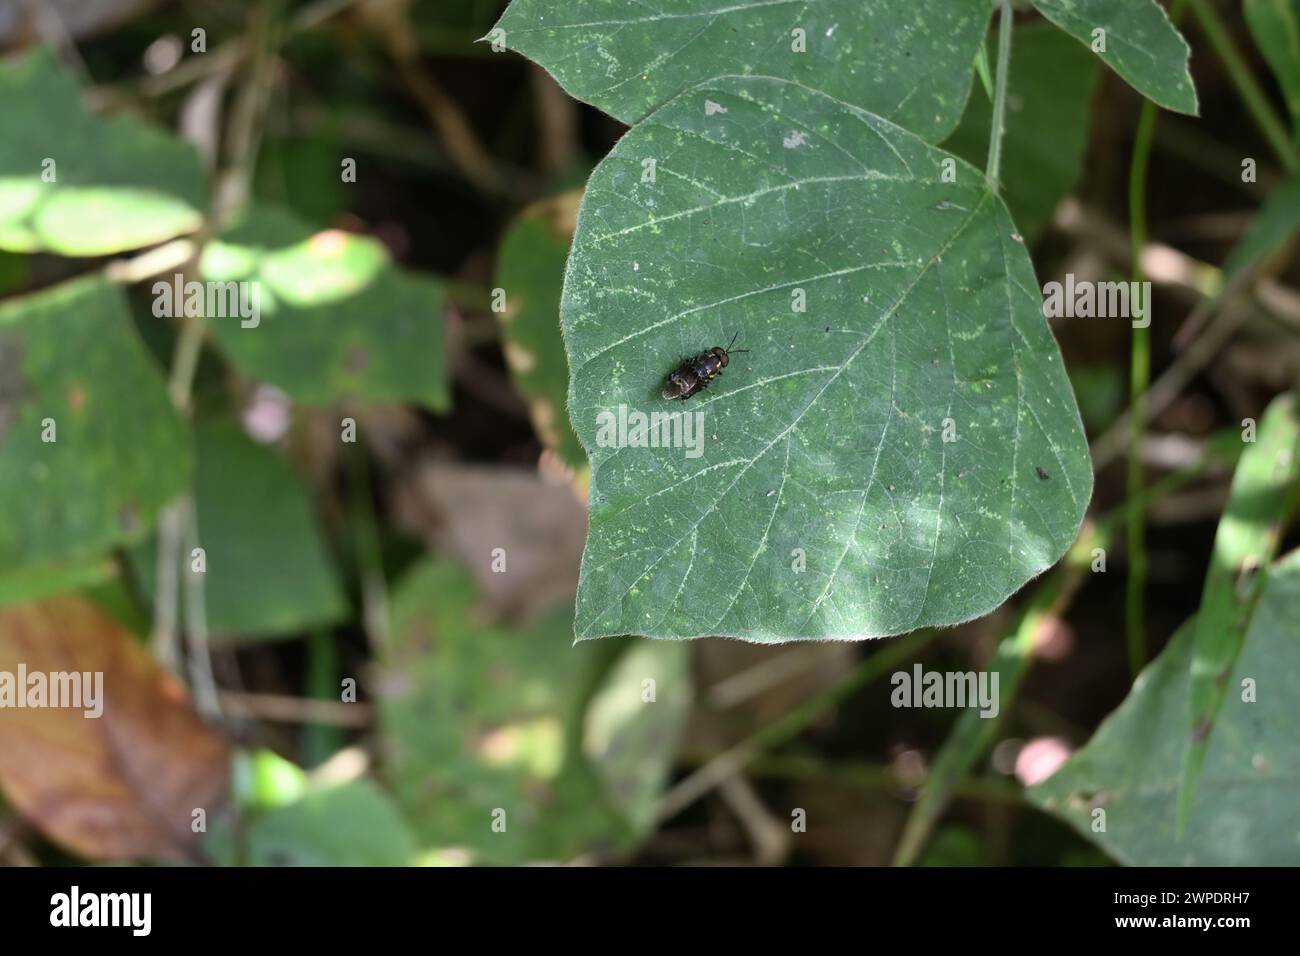 A golden metallic colored small black fly resting on the surface of a tropical kudzu leaf. This fly has similar appearance to the soldier fly species Stock Photo